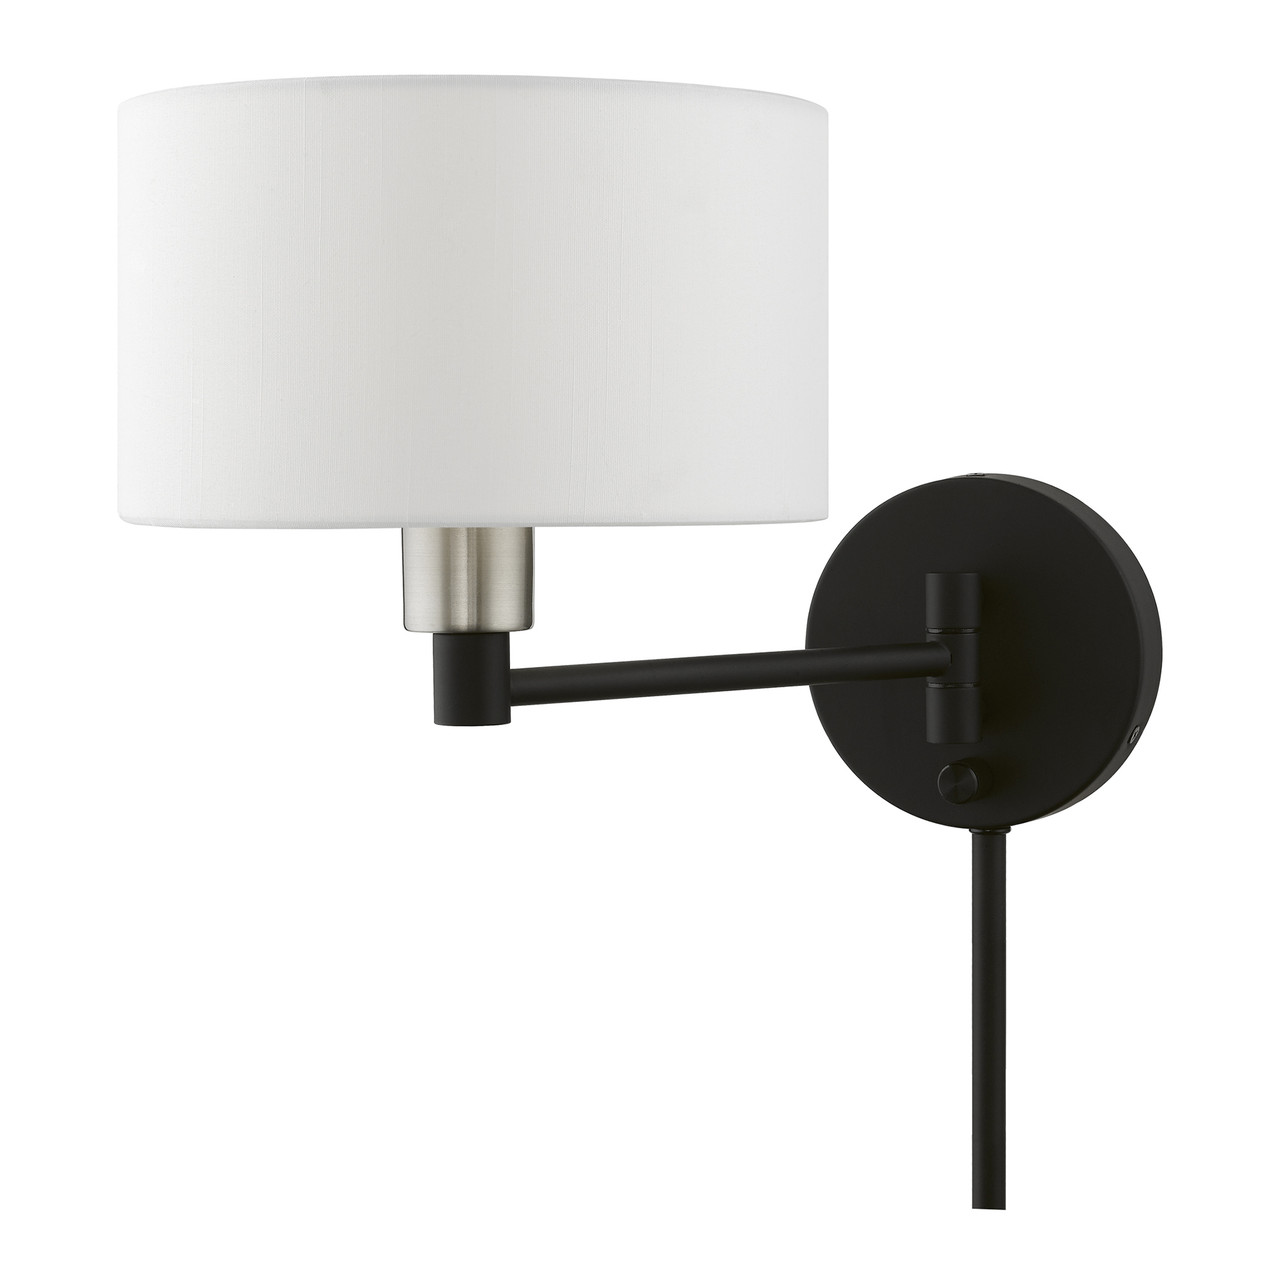 LIVEX LIGHTING 40080-04 1 Light Black with Brushed Nickel Accent Swing Arm Wall Lamp